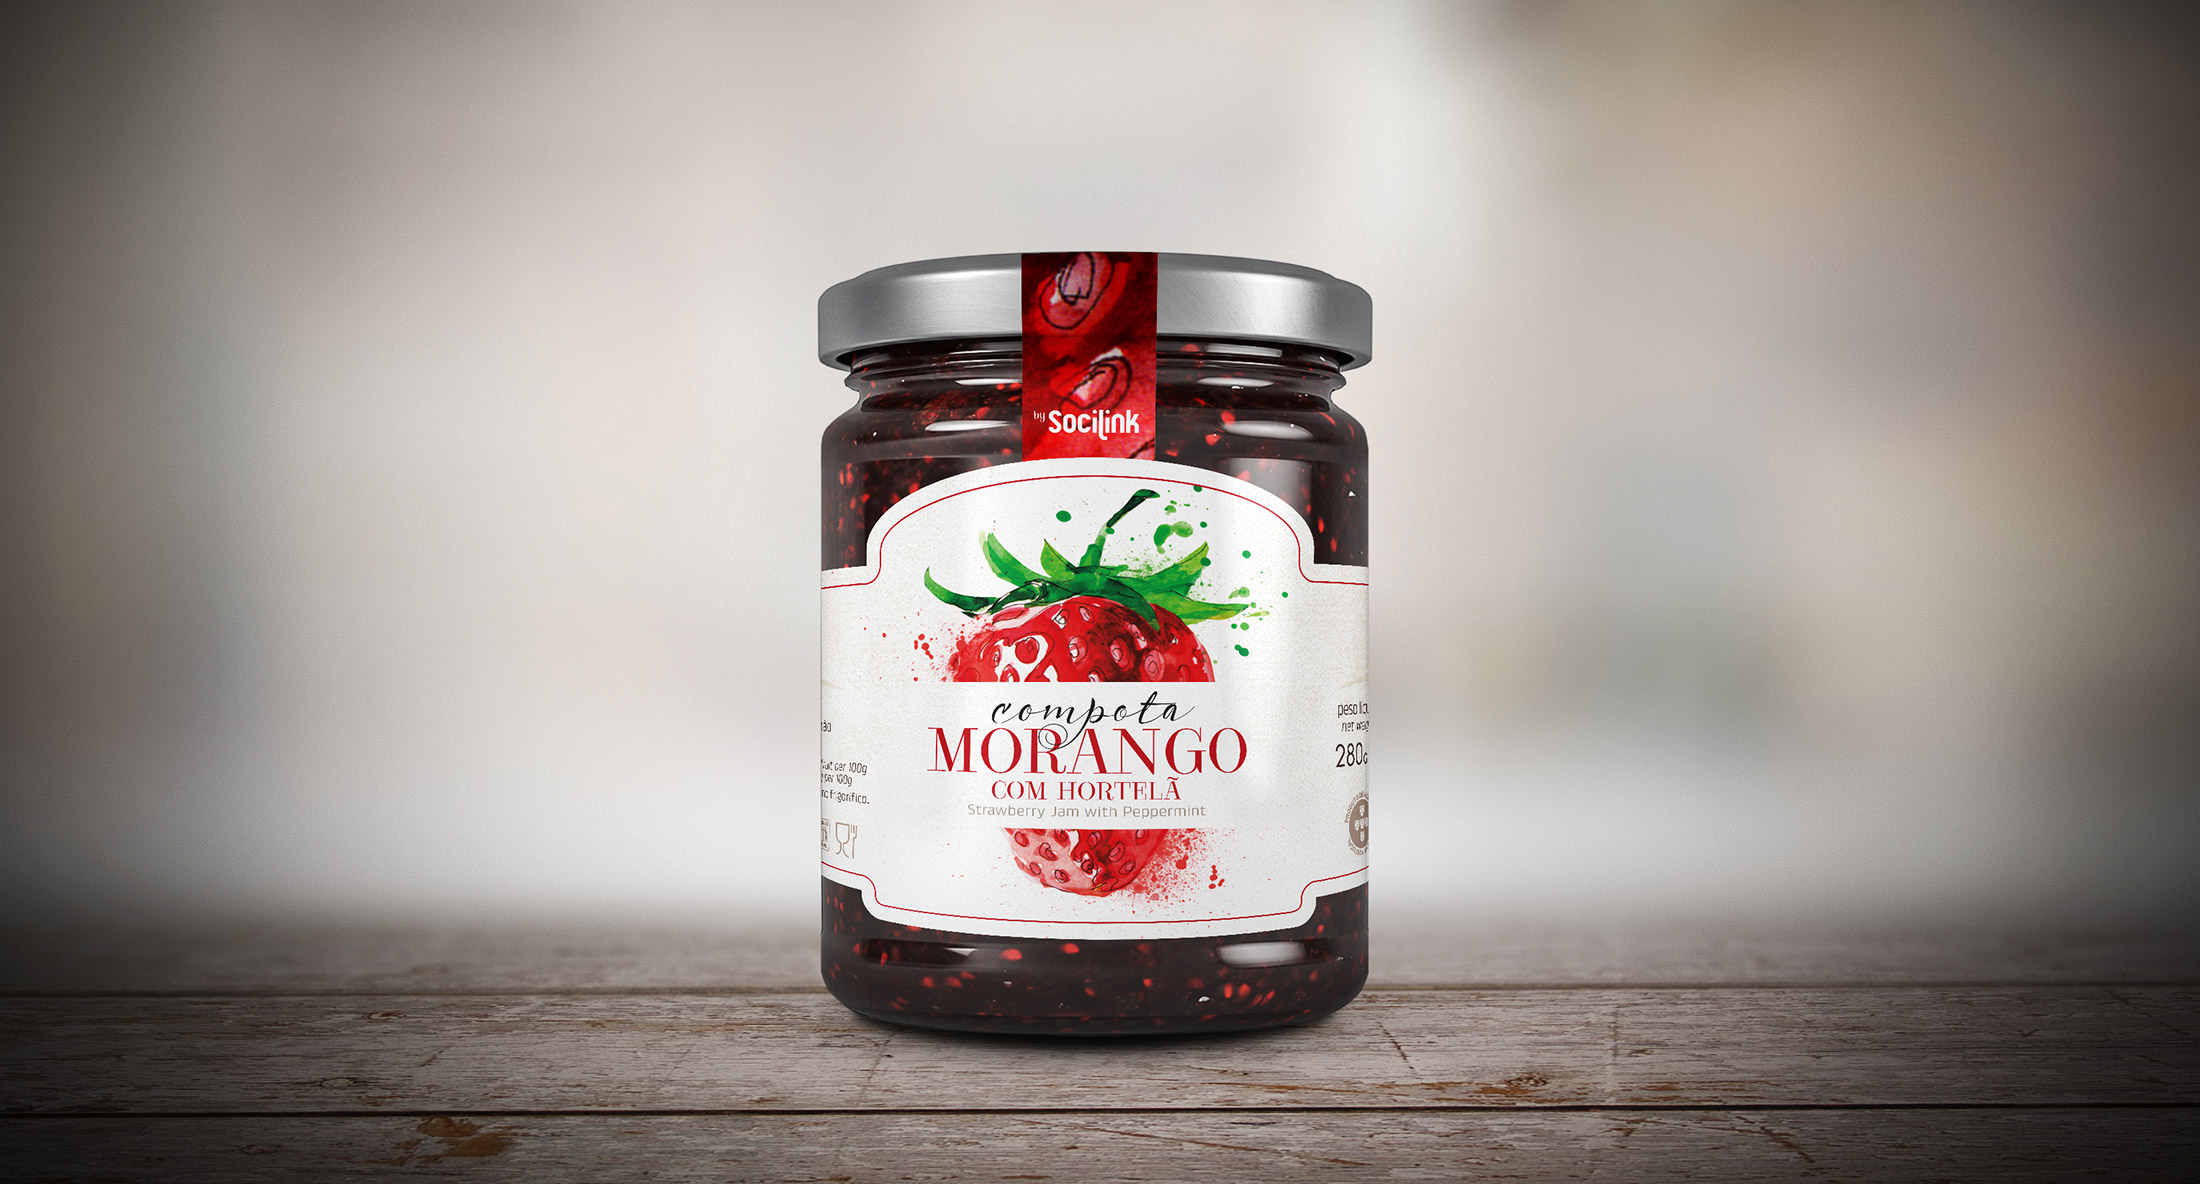 Homemade Jams and Honey Branding and Packaging Design from Portugal